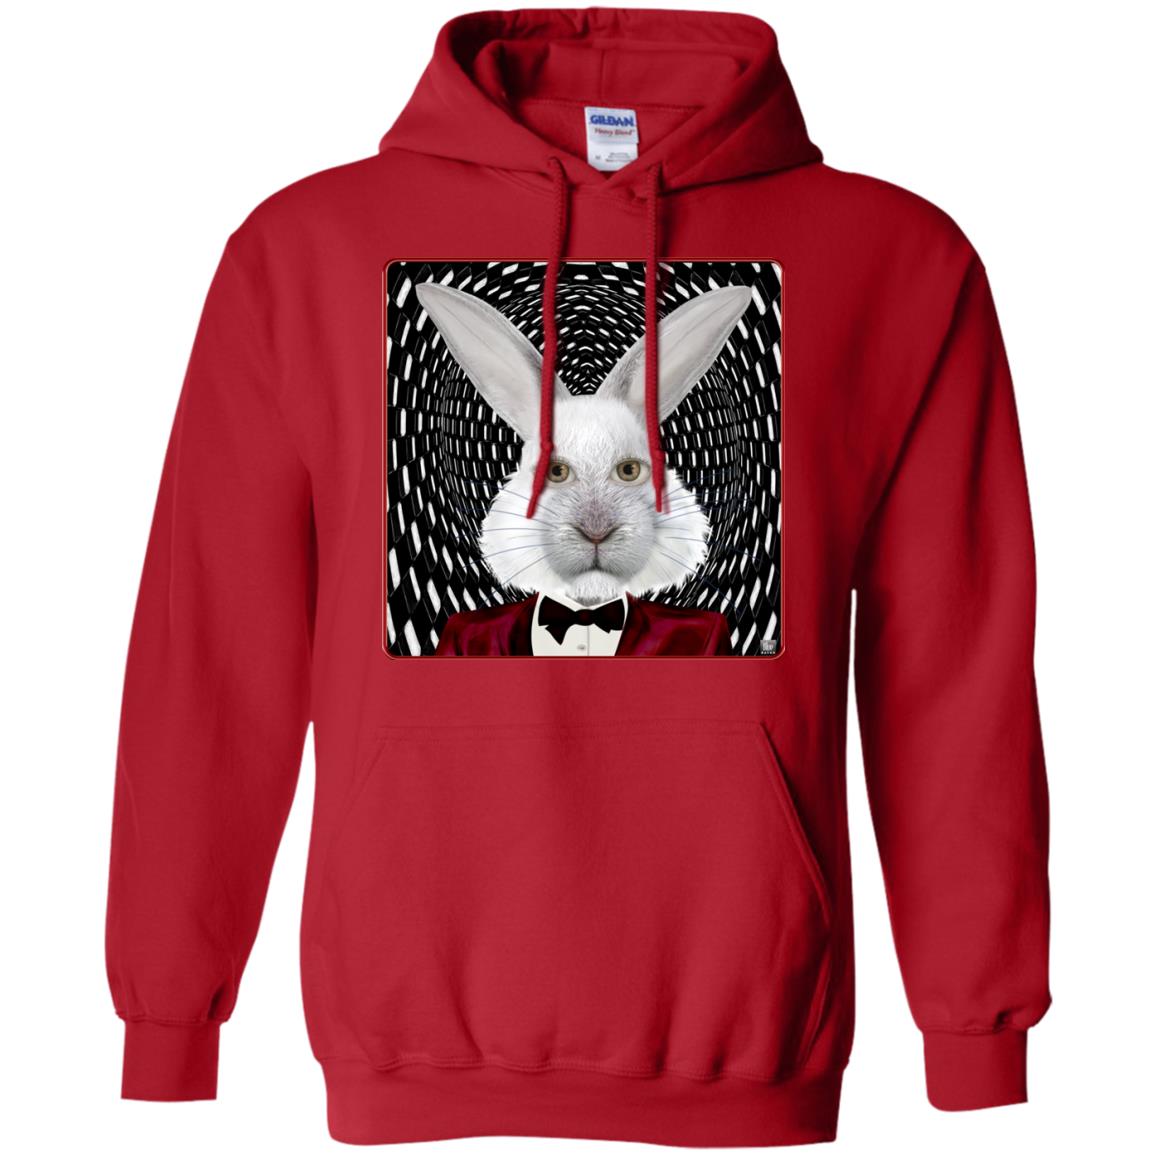 the white rabbit - Adult Hoodie